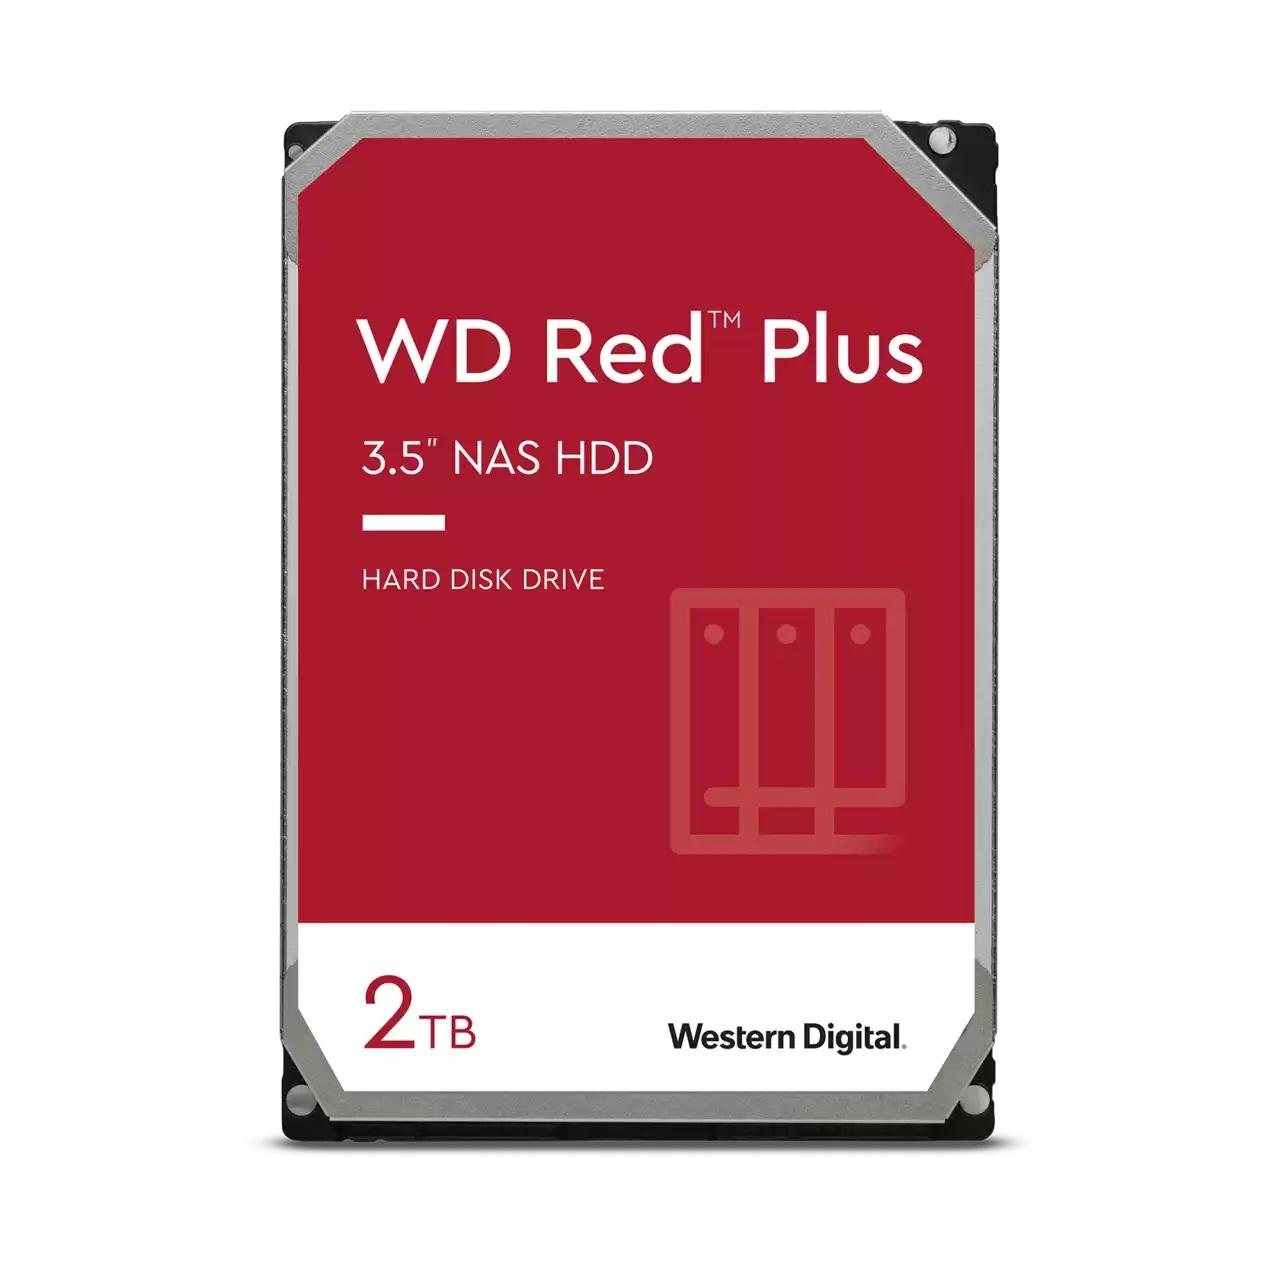 Хард диск WD Red PLUS NAS, 2TB, 5400rpm, 512MB, SATA 3